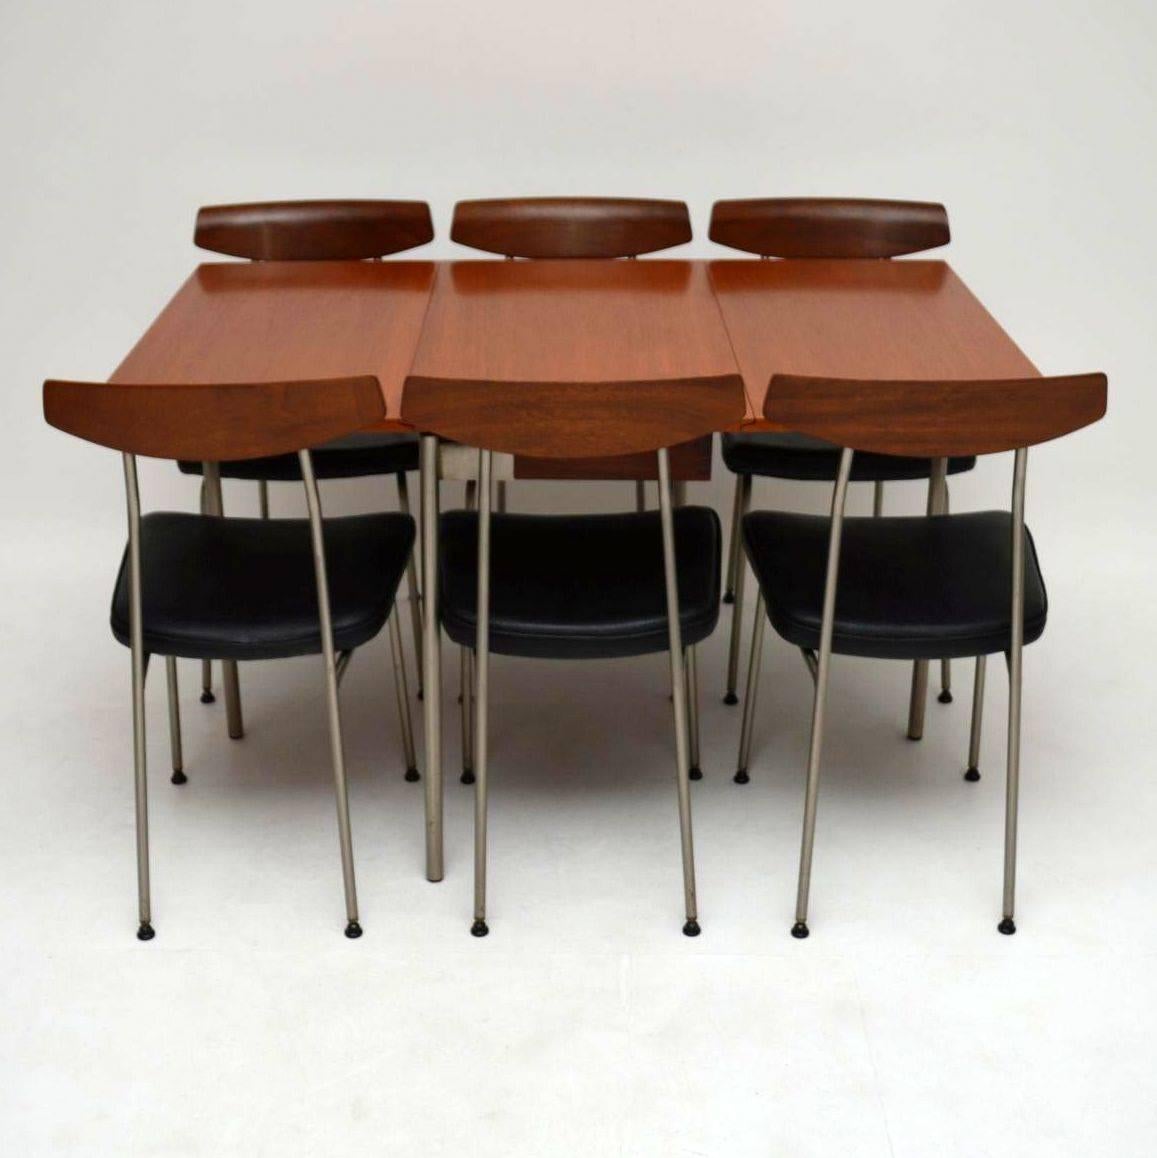 A stunning and rare vintage dining table and chairs, these were designed by John and Sylvia Reid for Stag Furniture’s S range, they date from the 1950s-1960s. This consists of a teak drop leaf dining table with steel legs, and six teak back dining